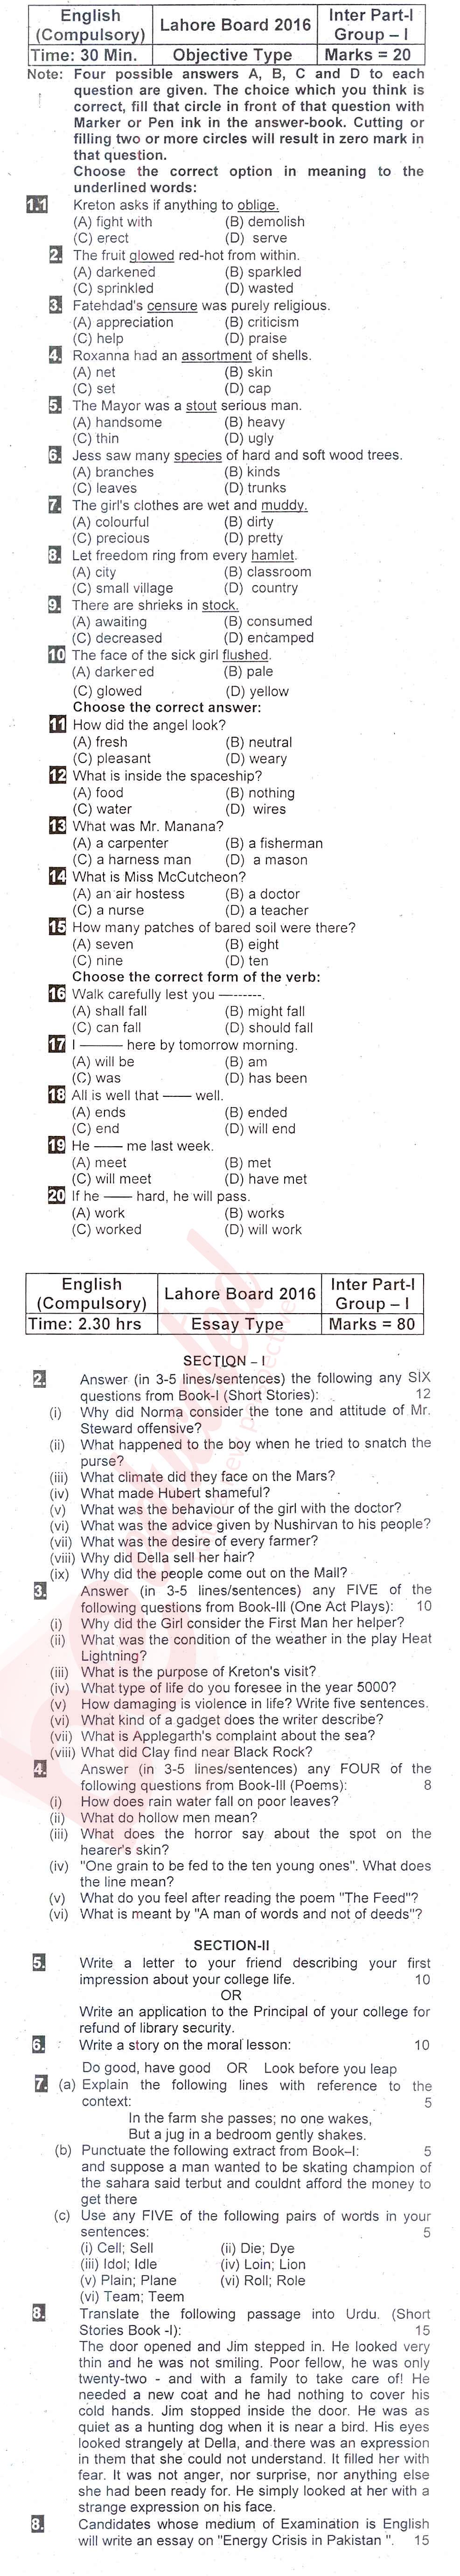 English 11th class Past Paper Group 1 BISE Lahore 2016